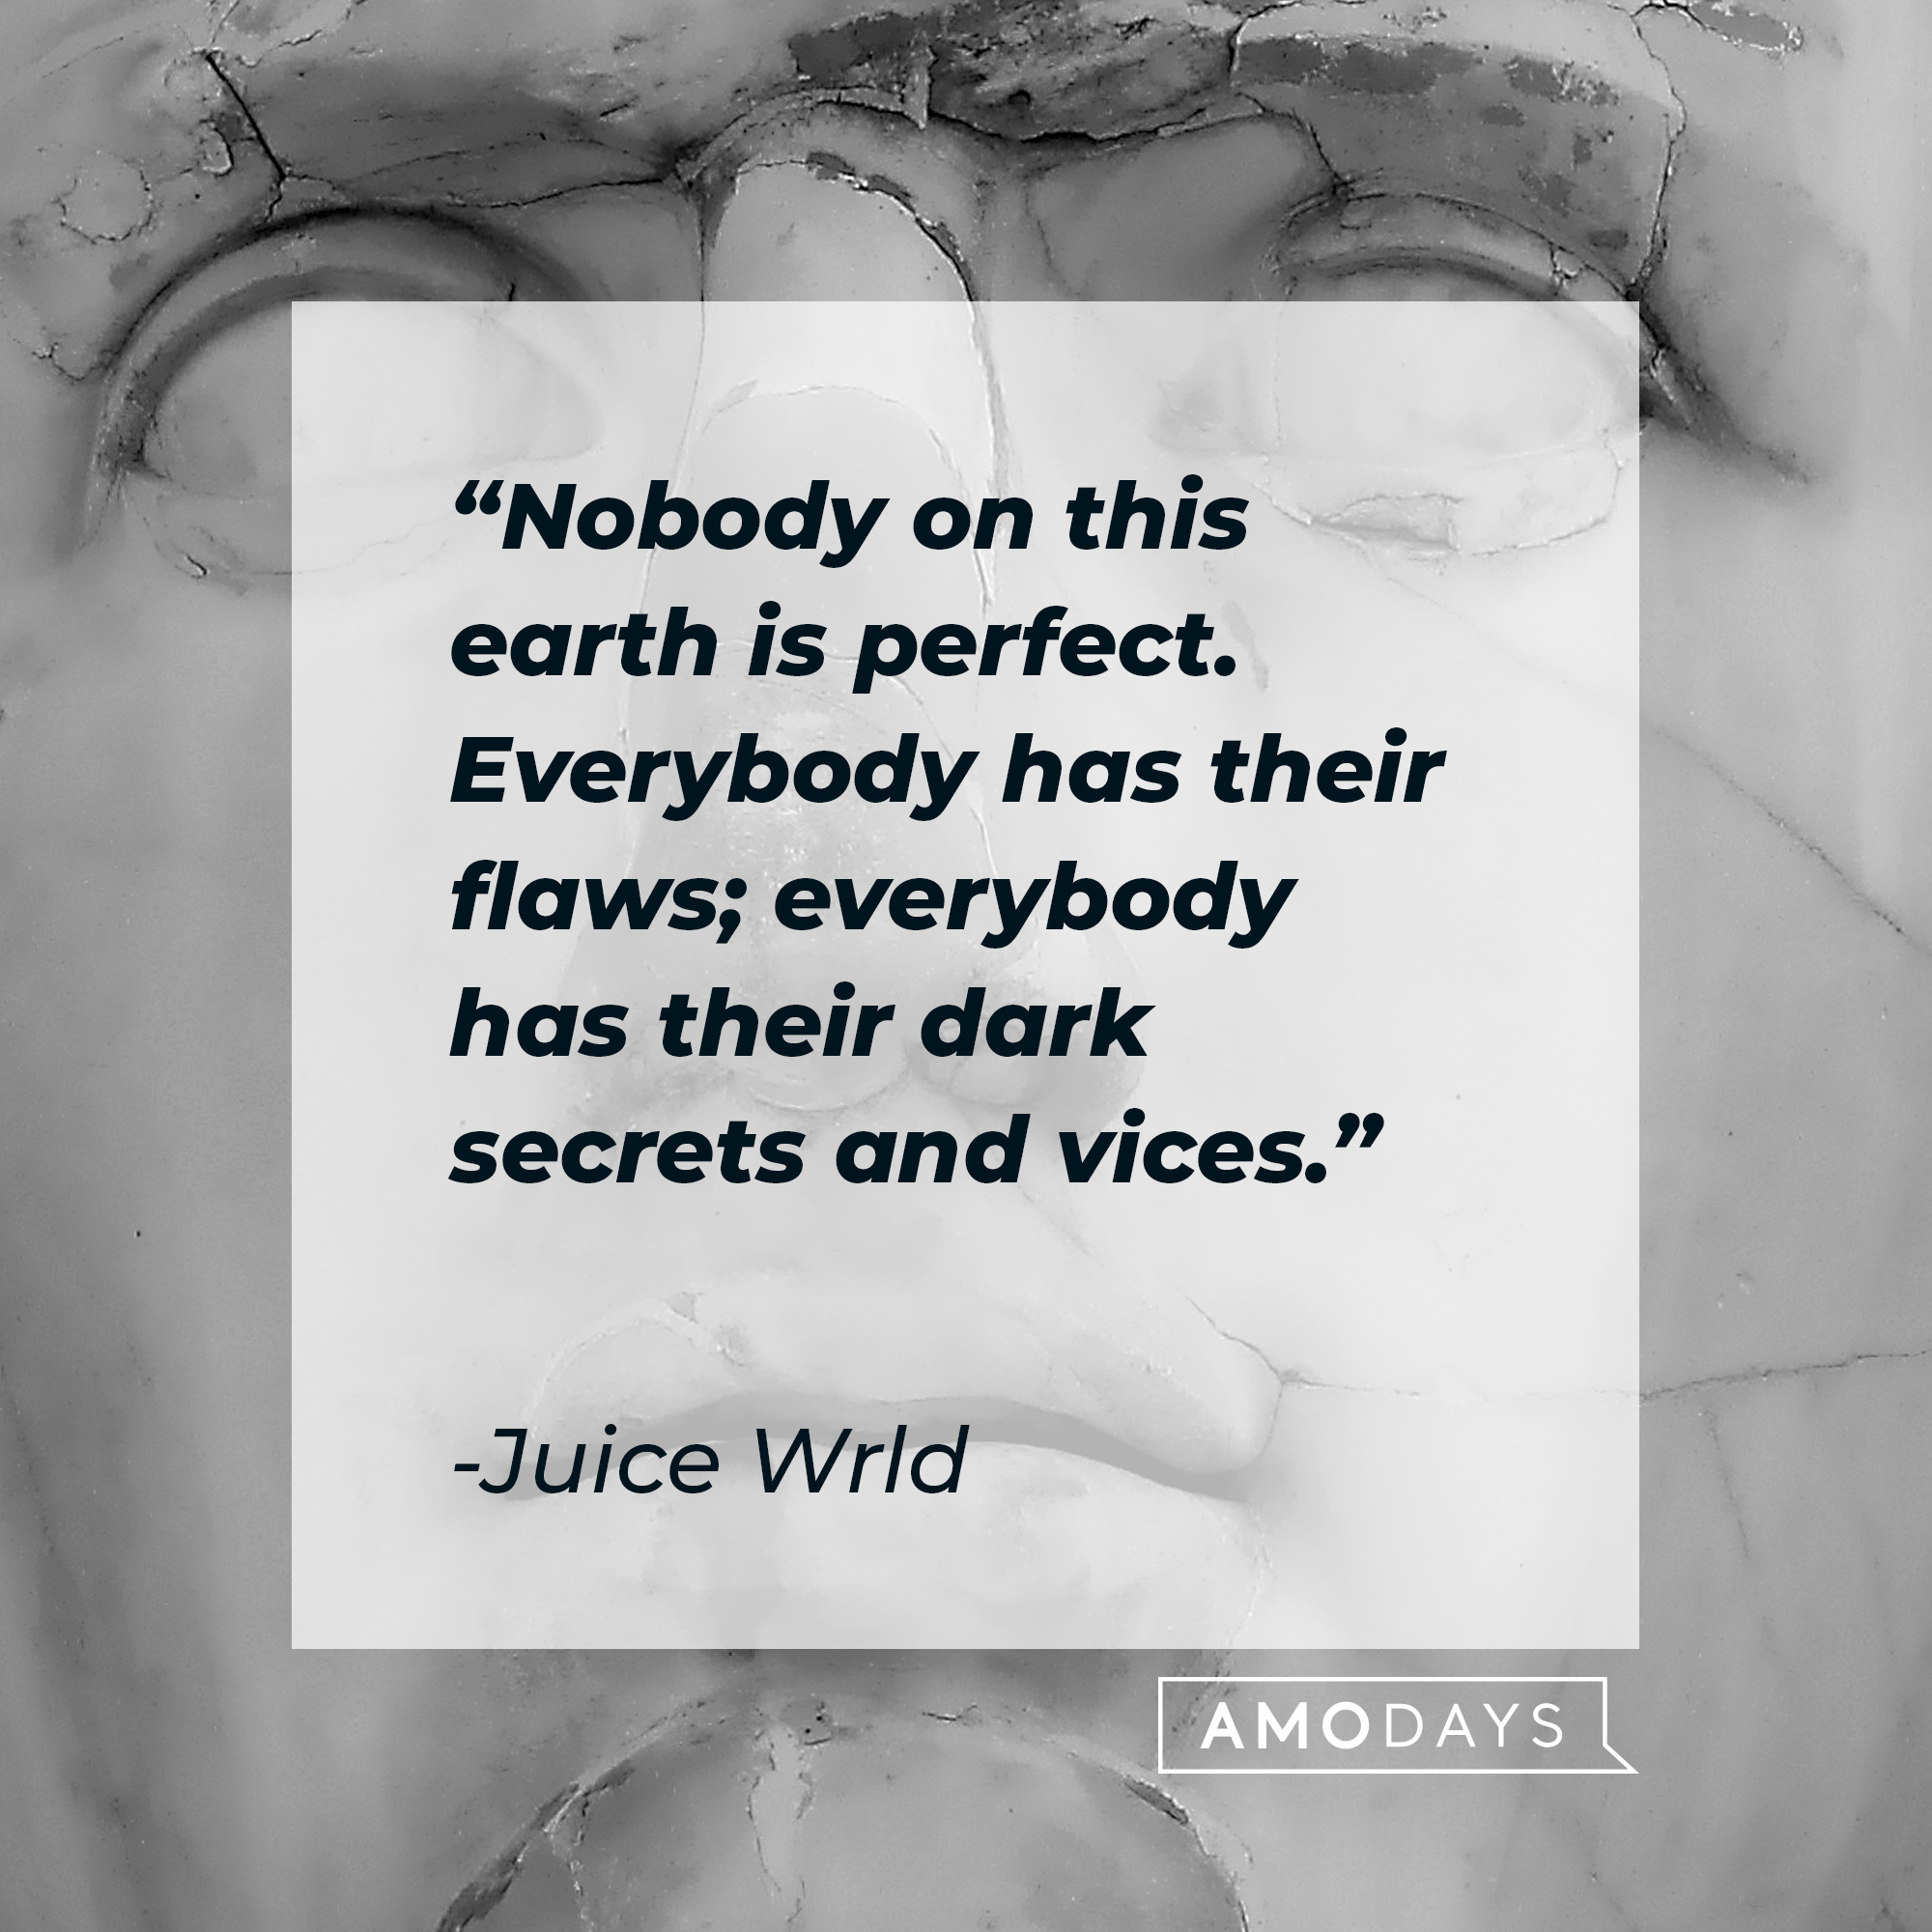 Juice Wrld's quote: "Nobody on this earth is perfect. Everybody has their flaws; everybody has their dark secrets and vices." | Image: Unsplash